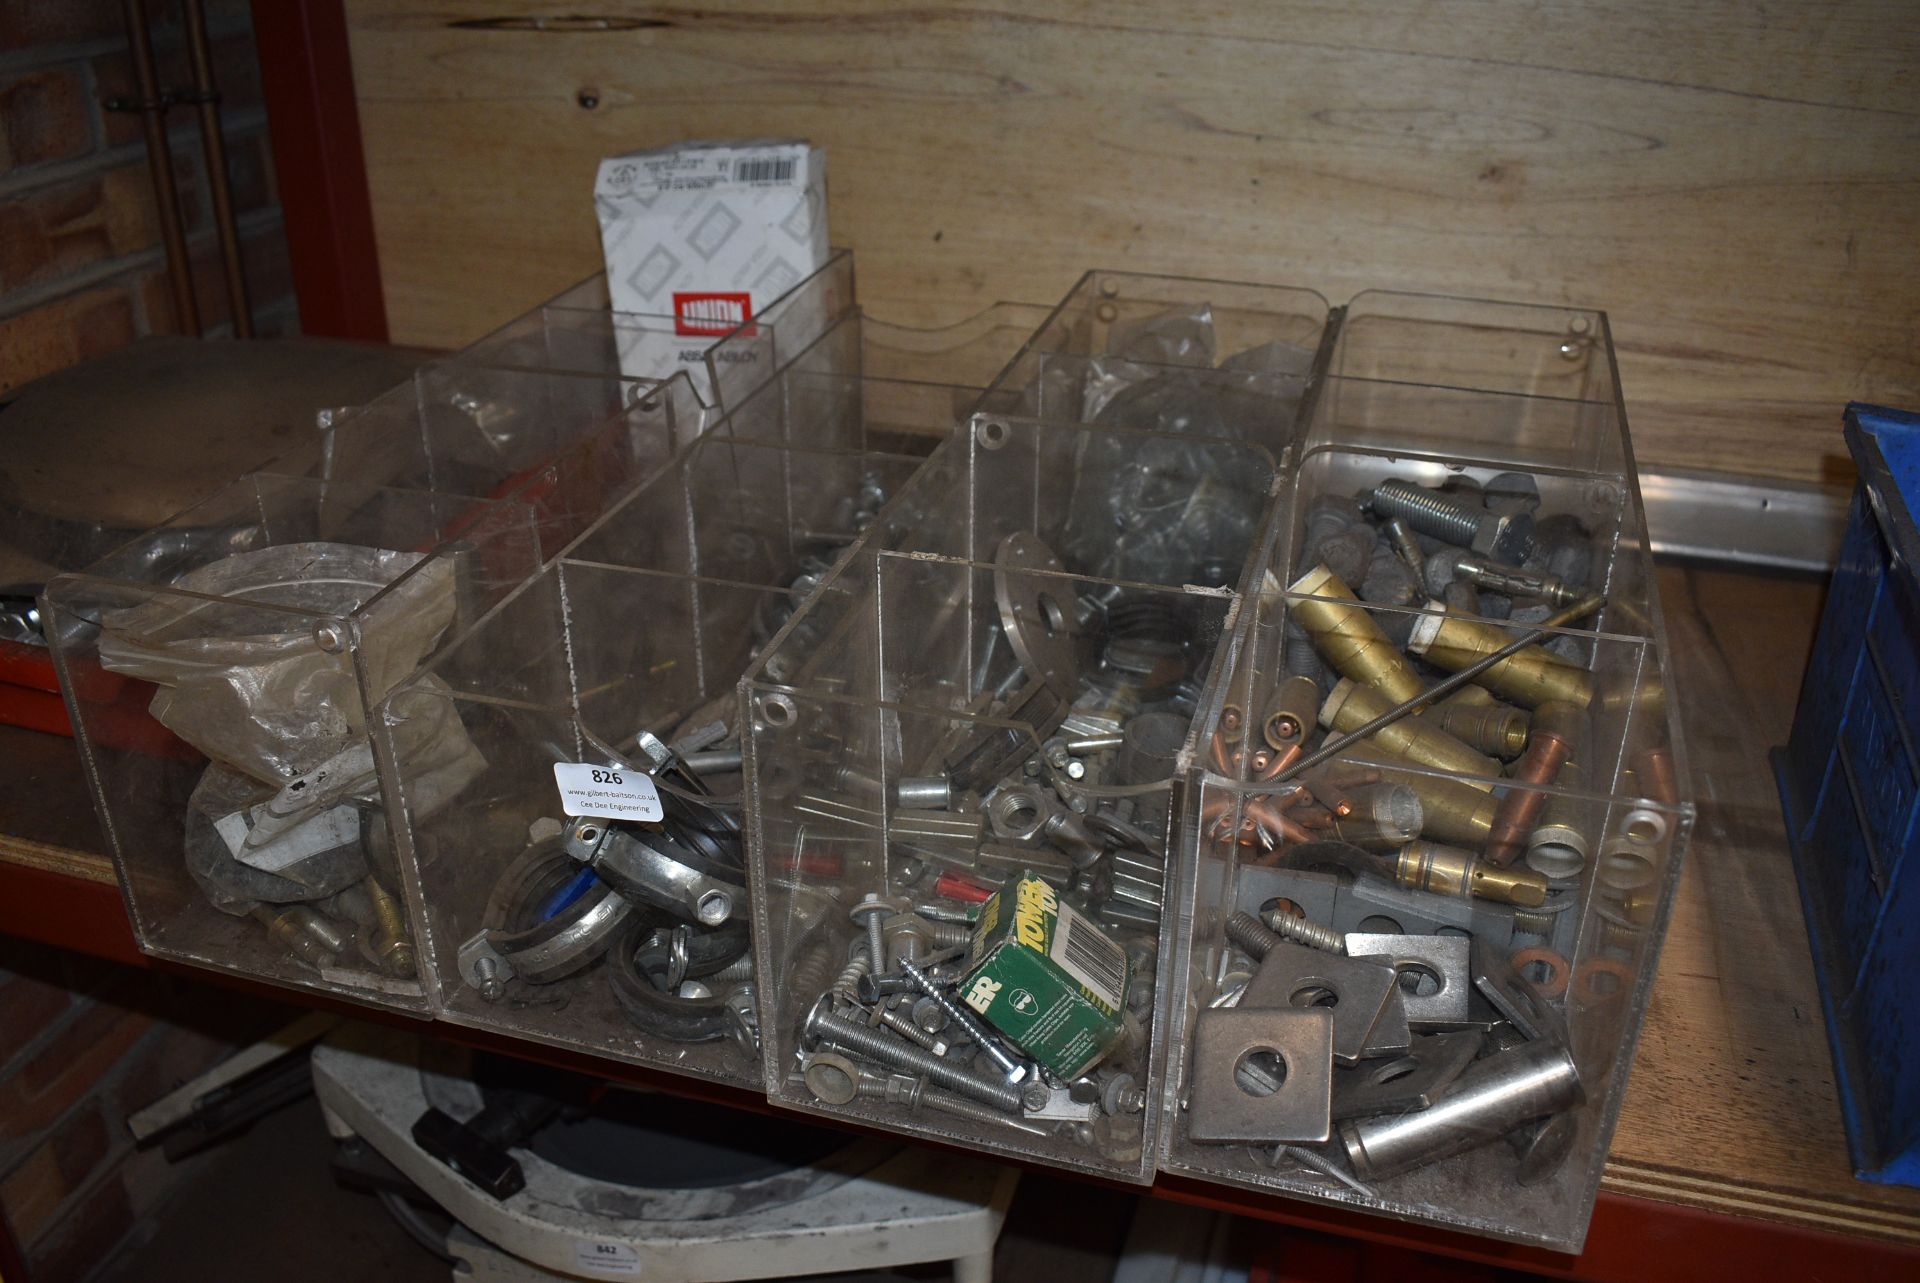 *Perspex Storage Boxes Containing Assorted Nuts, Bolts, Mig Welding and Cutting Torch Nozzles, etc.